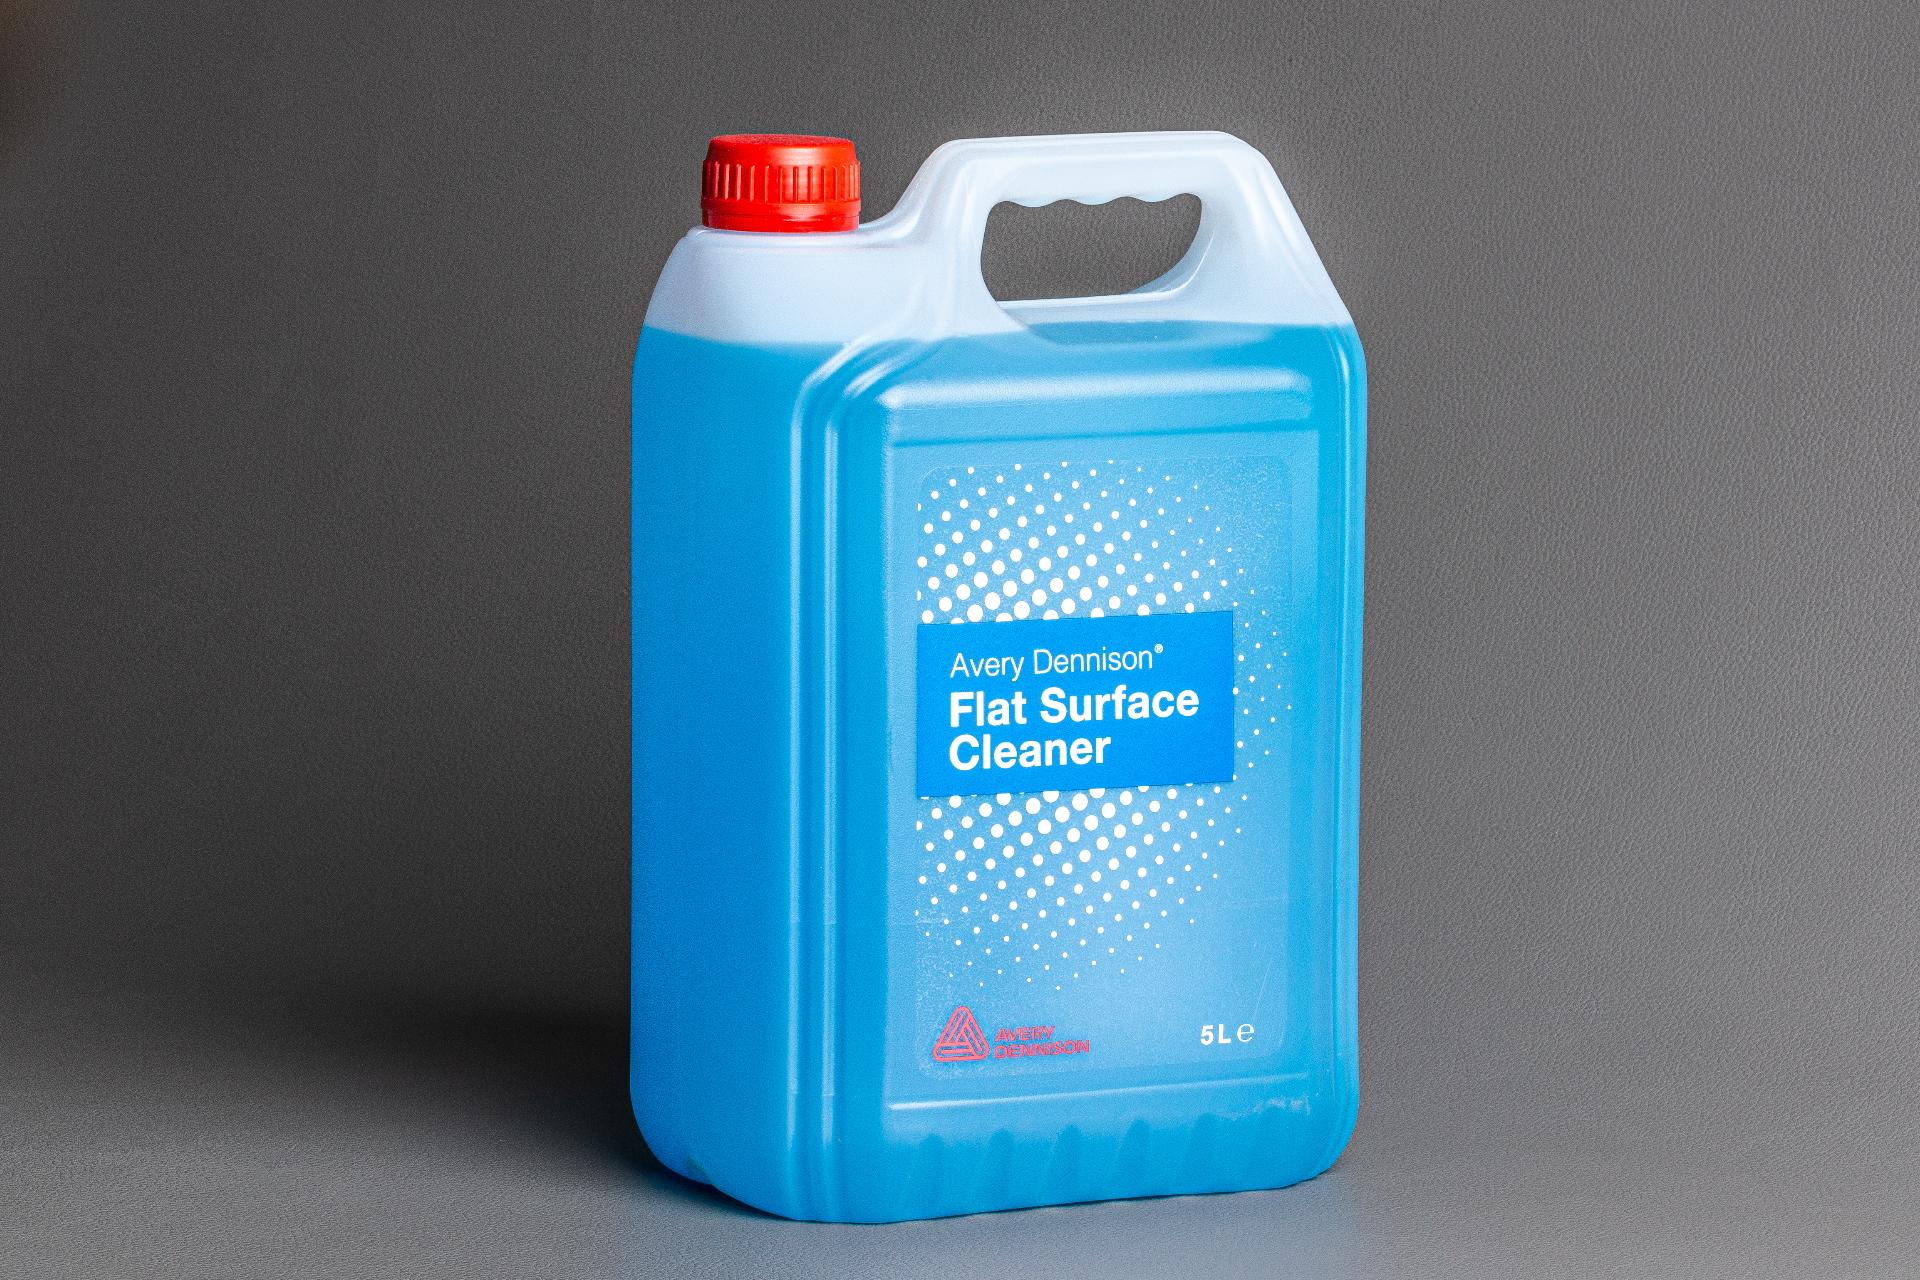 Foto: Avery Dennison Flat Surface Cleaner - 5 ltr.